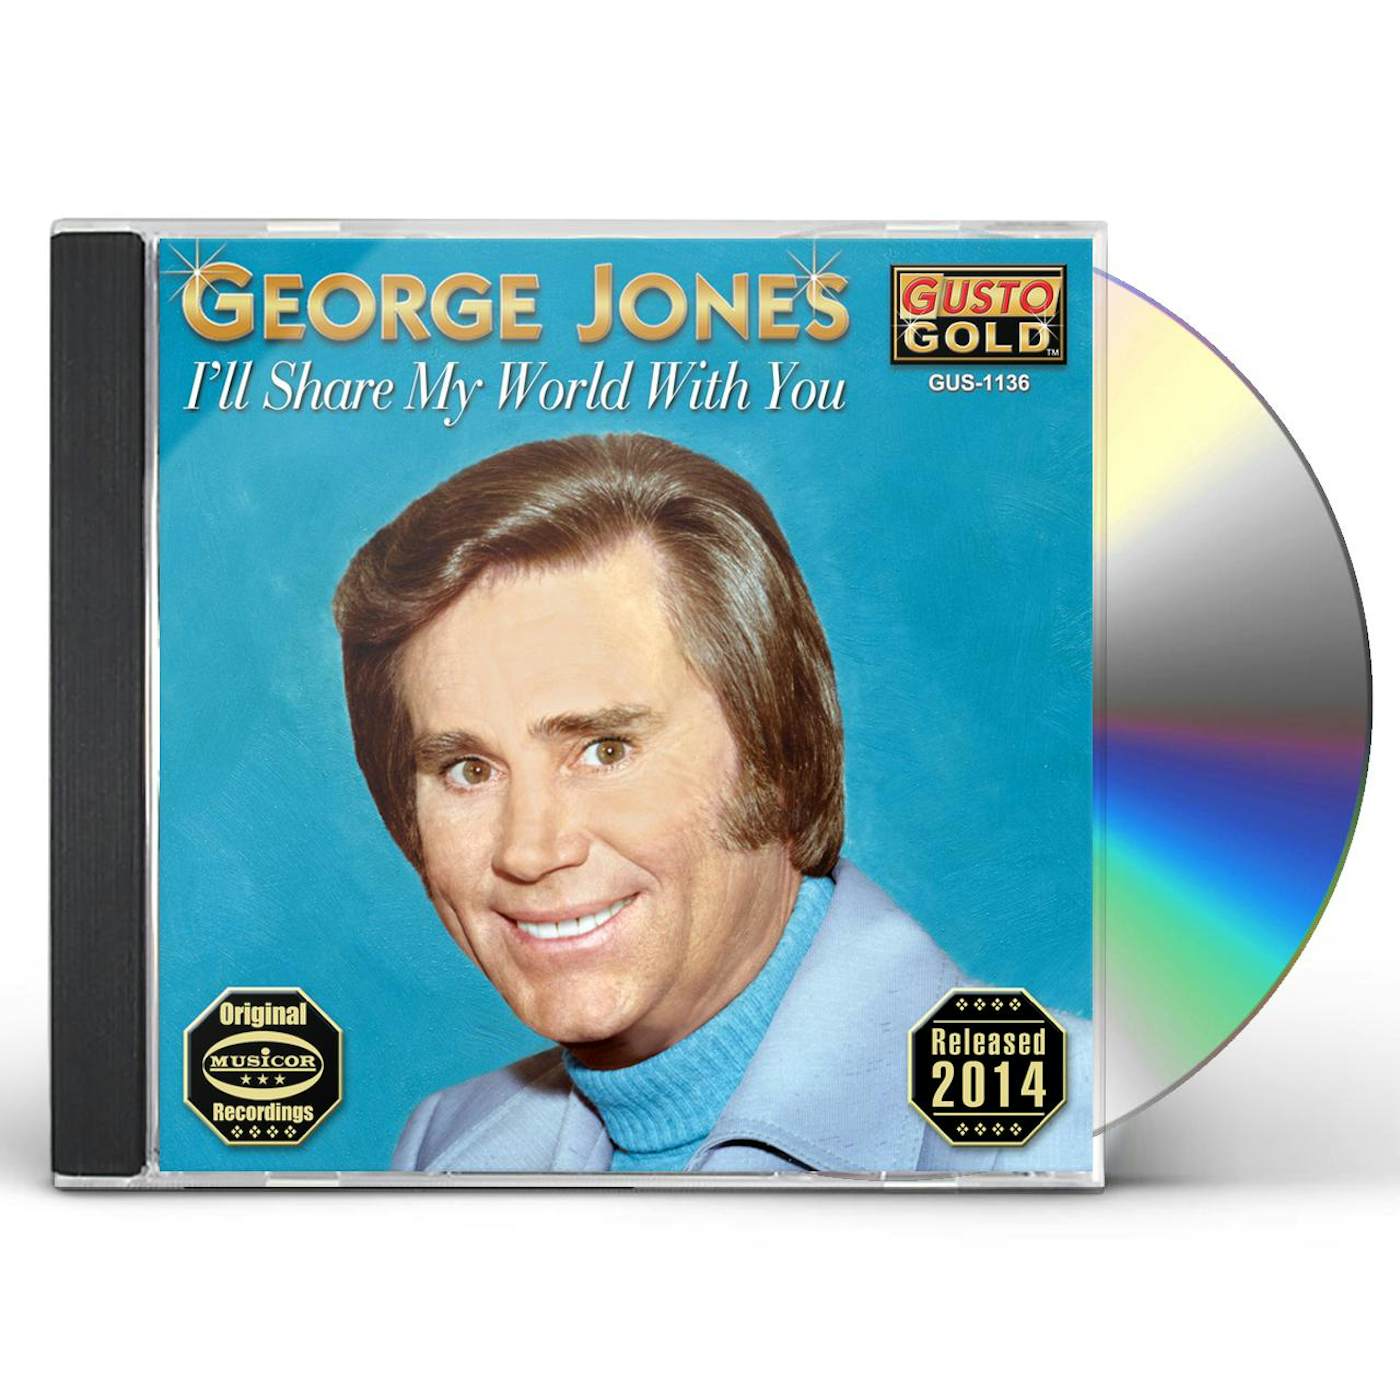 George Jones ILL SHARE MY WORLD WITH YOU CD